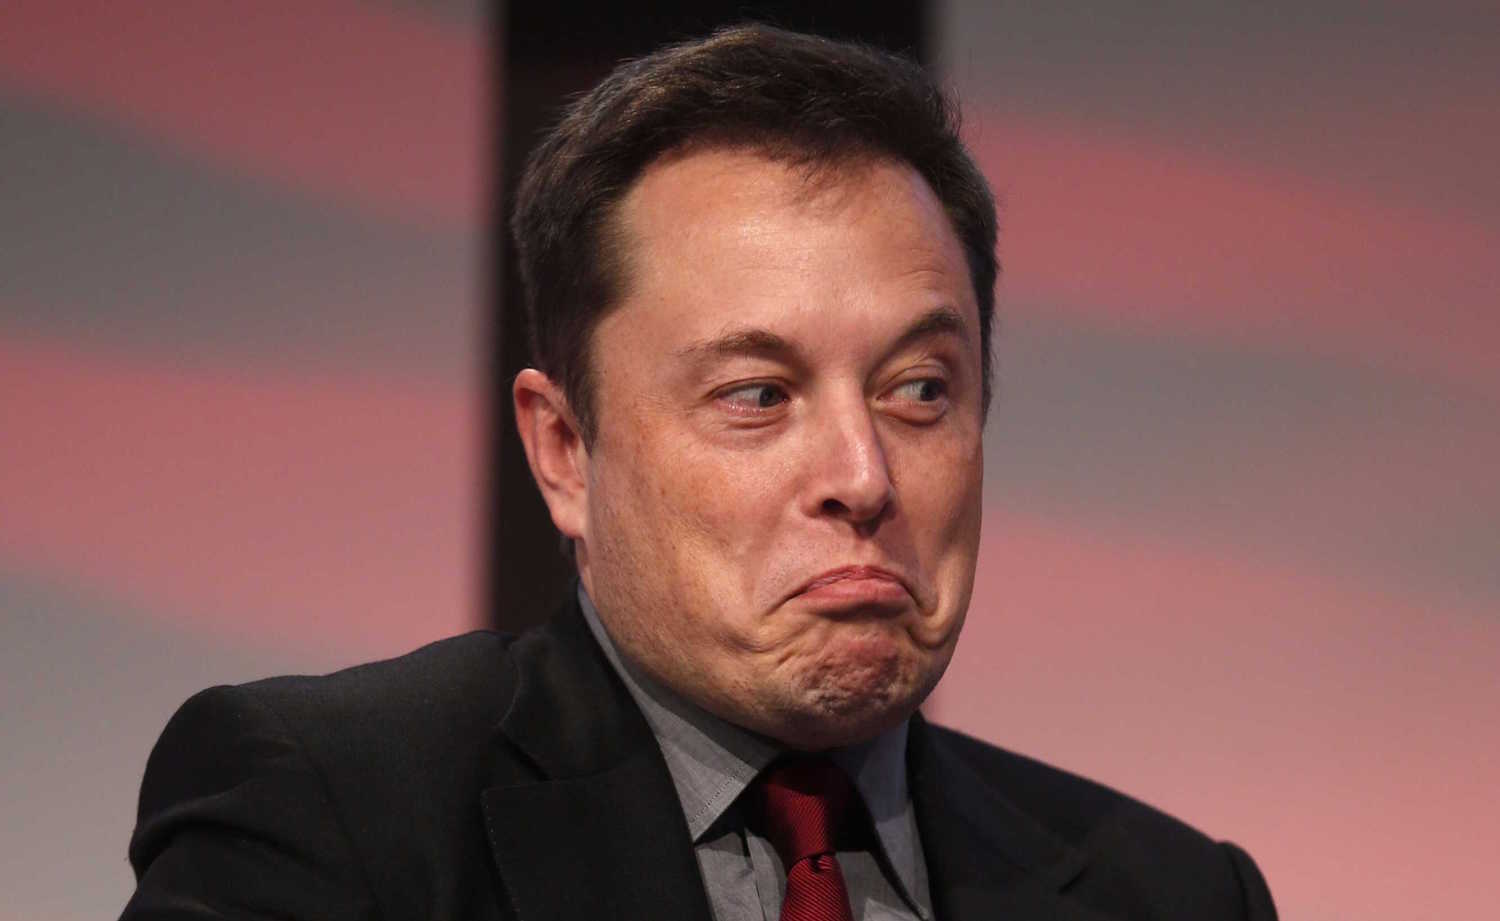 Elon Musk Twitter deal: Who’s in, who’s out since change of ownership